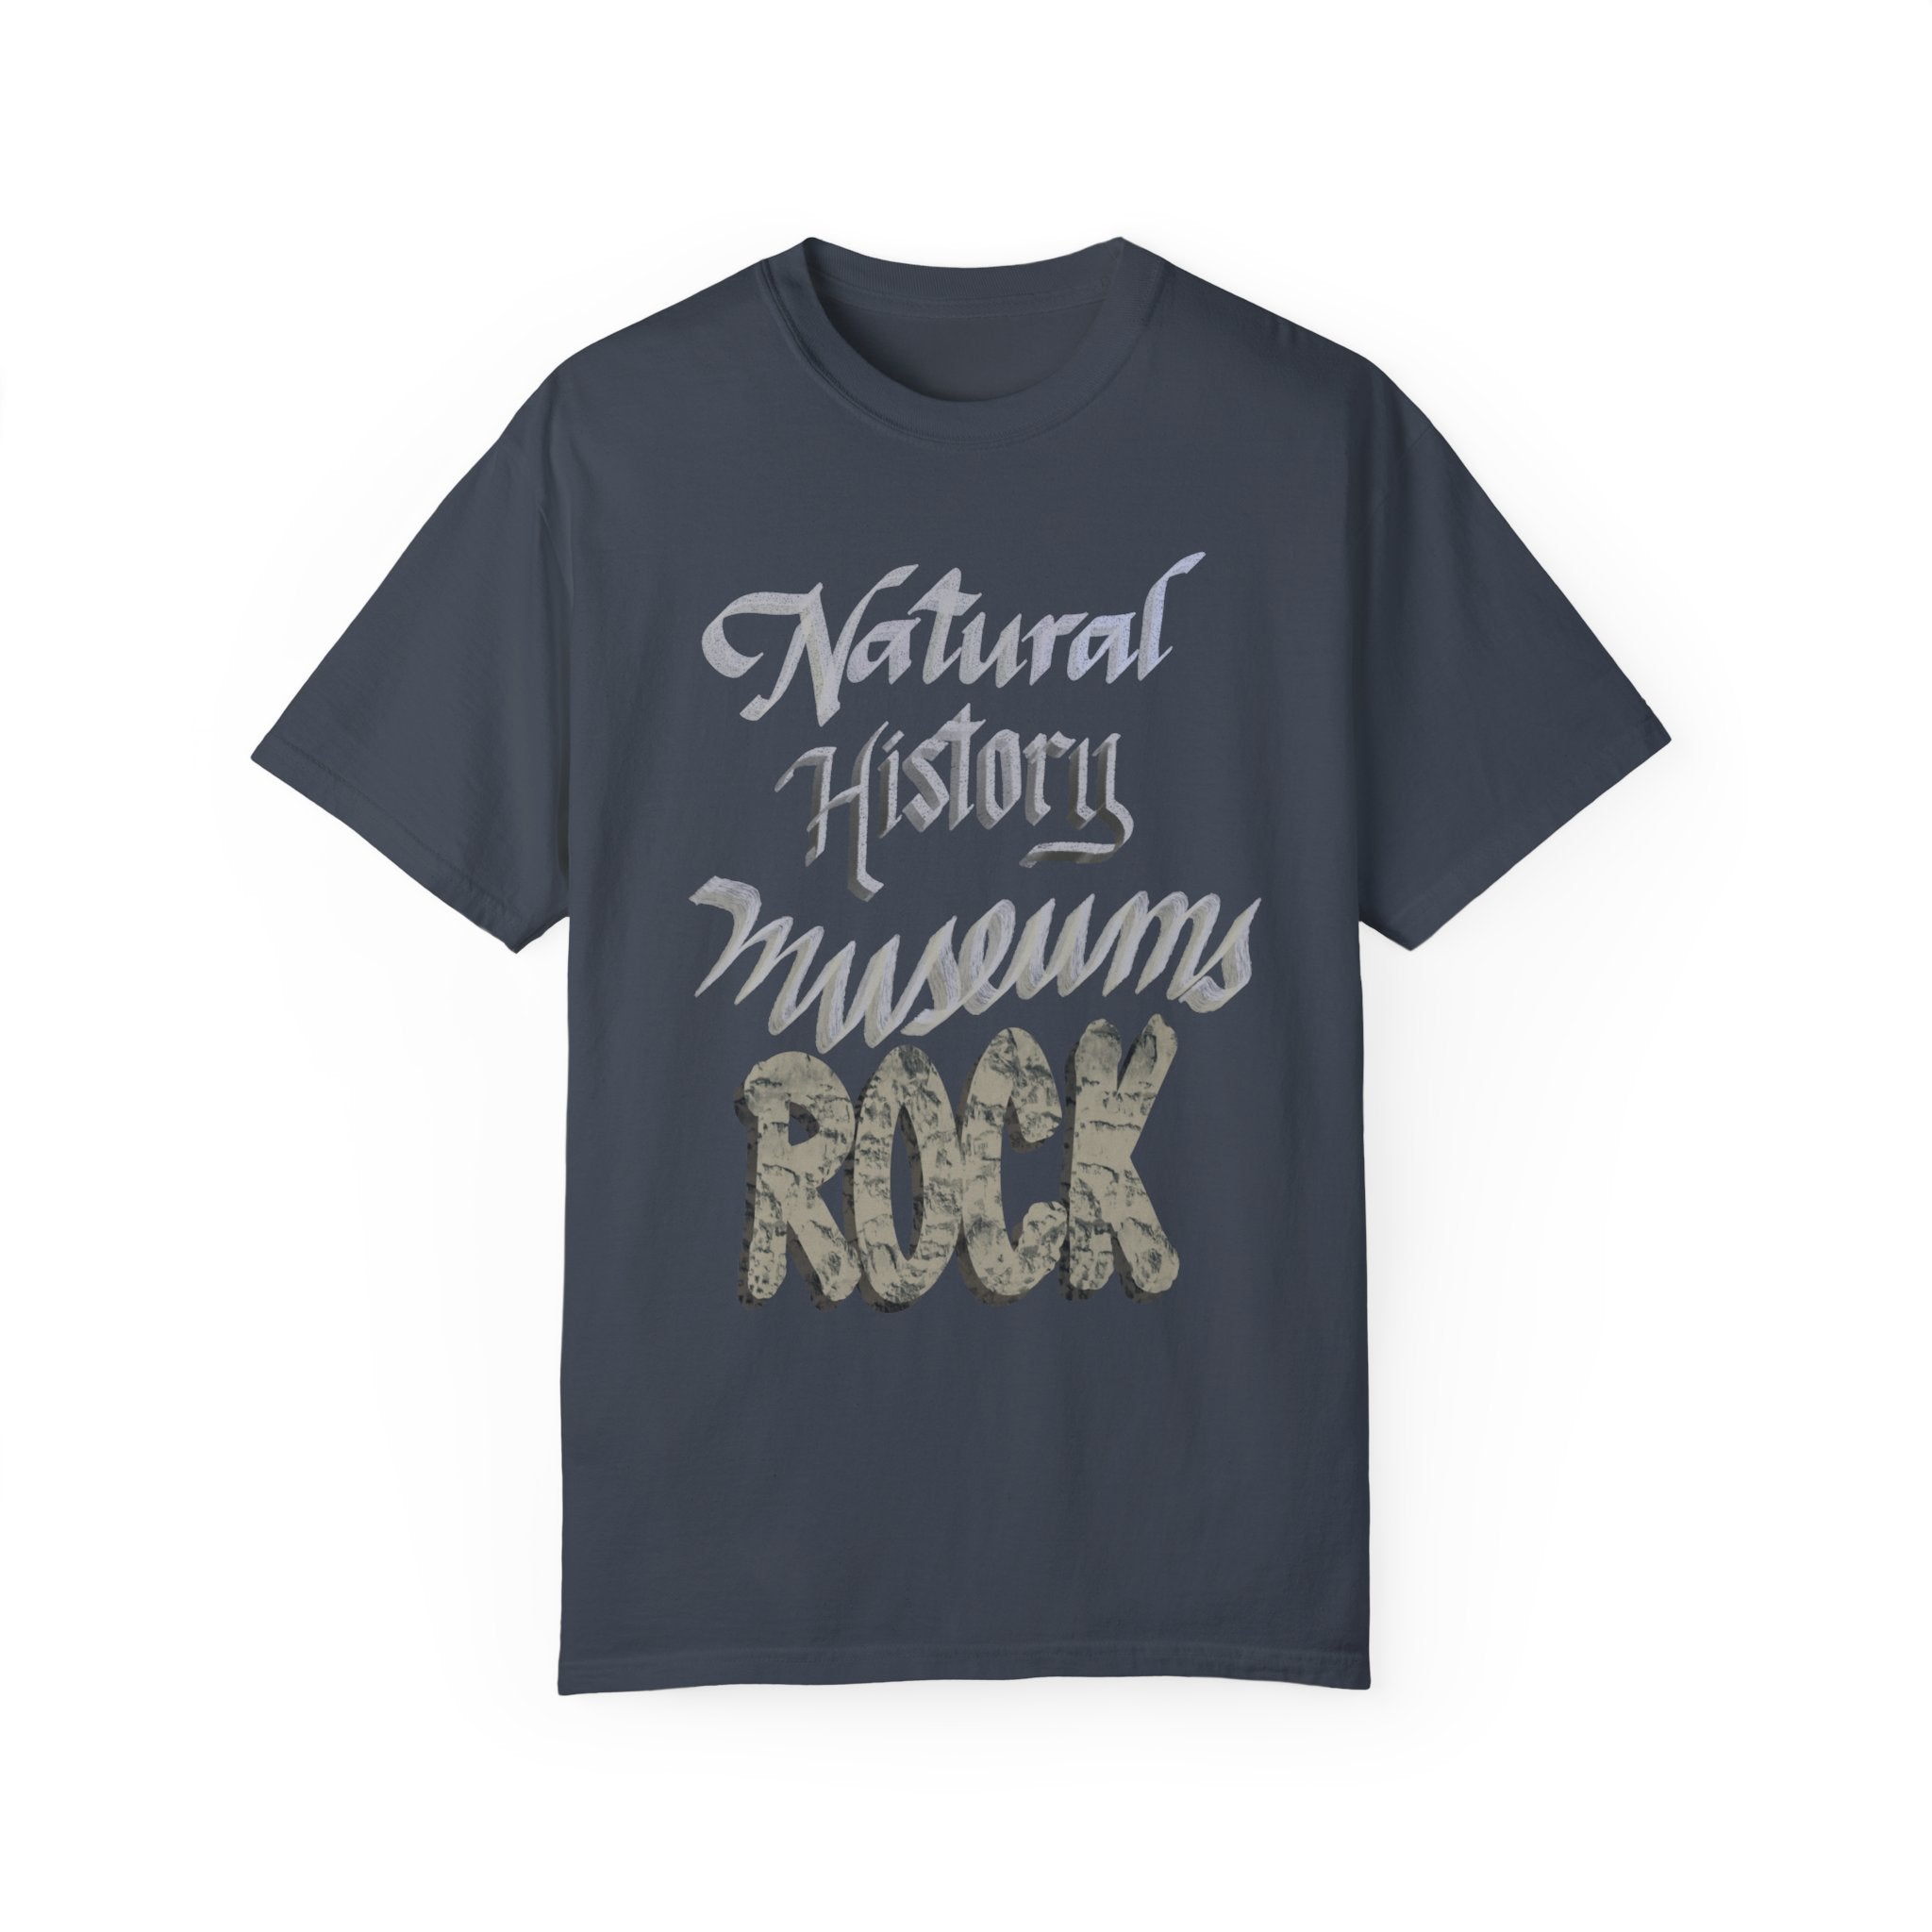 NATURAL HISTORY MUSEUMS ROCK Unisex Garment-Dyed T-shirt